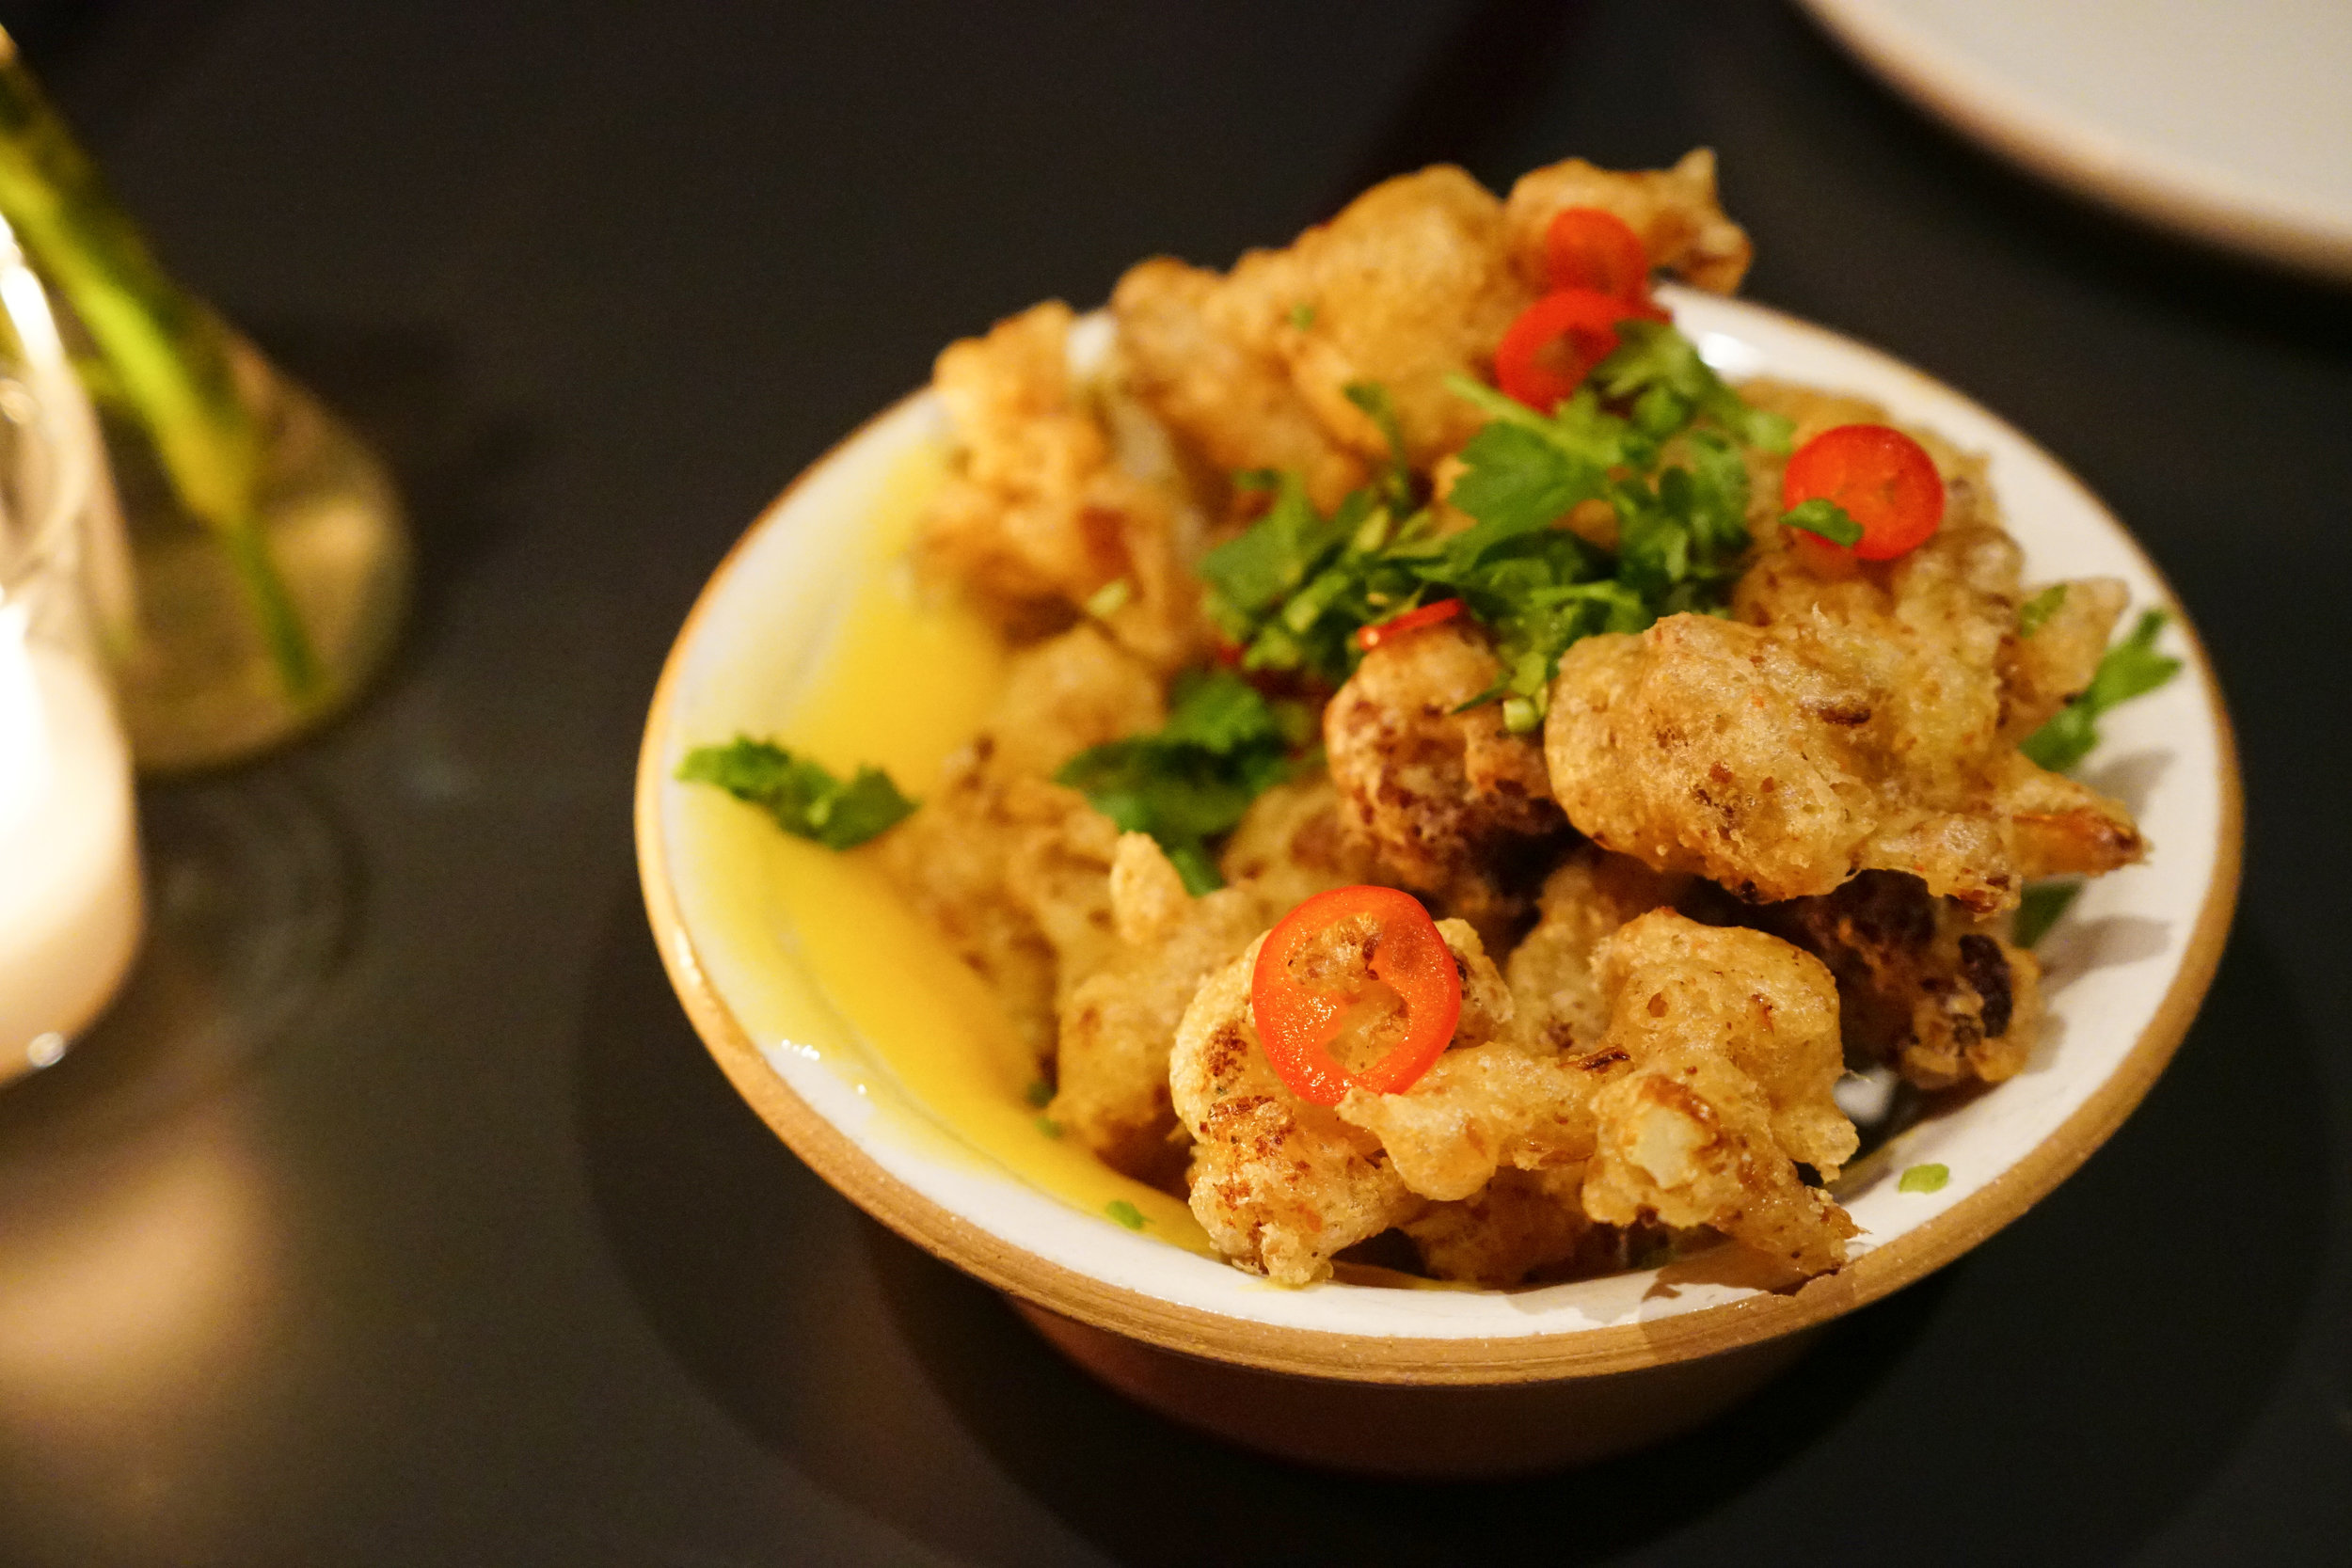 Crispy, Spiced Cauliflower with Meyer Lemon Jam and Chilies at Loring Place in New York City